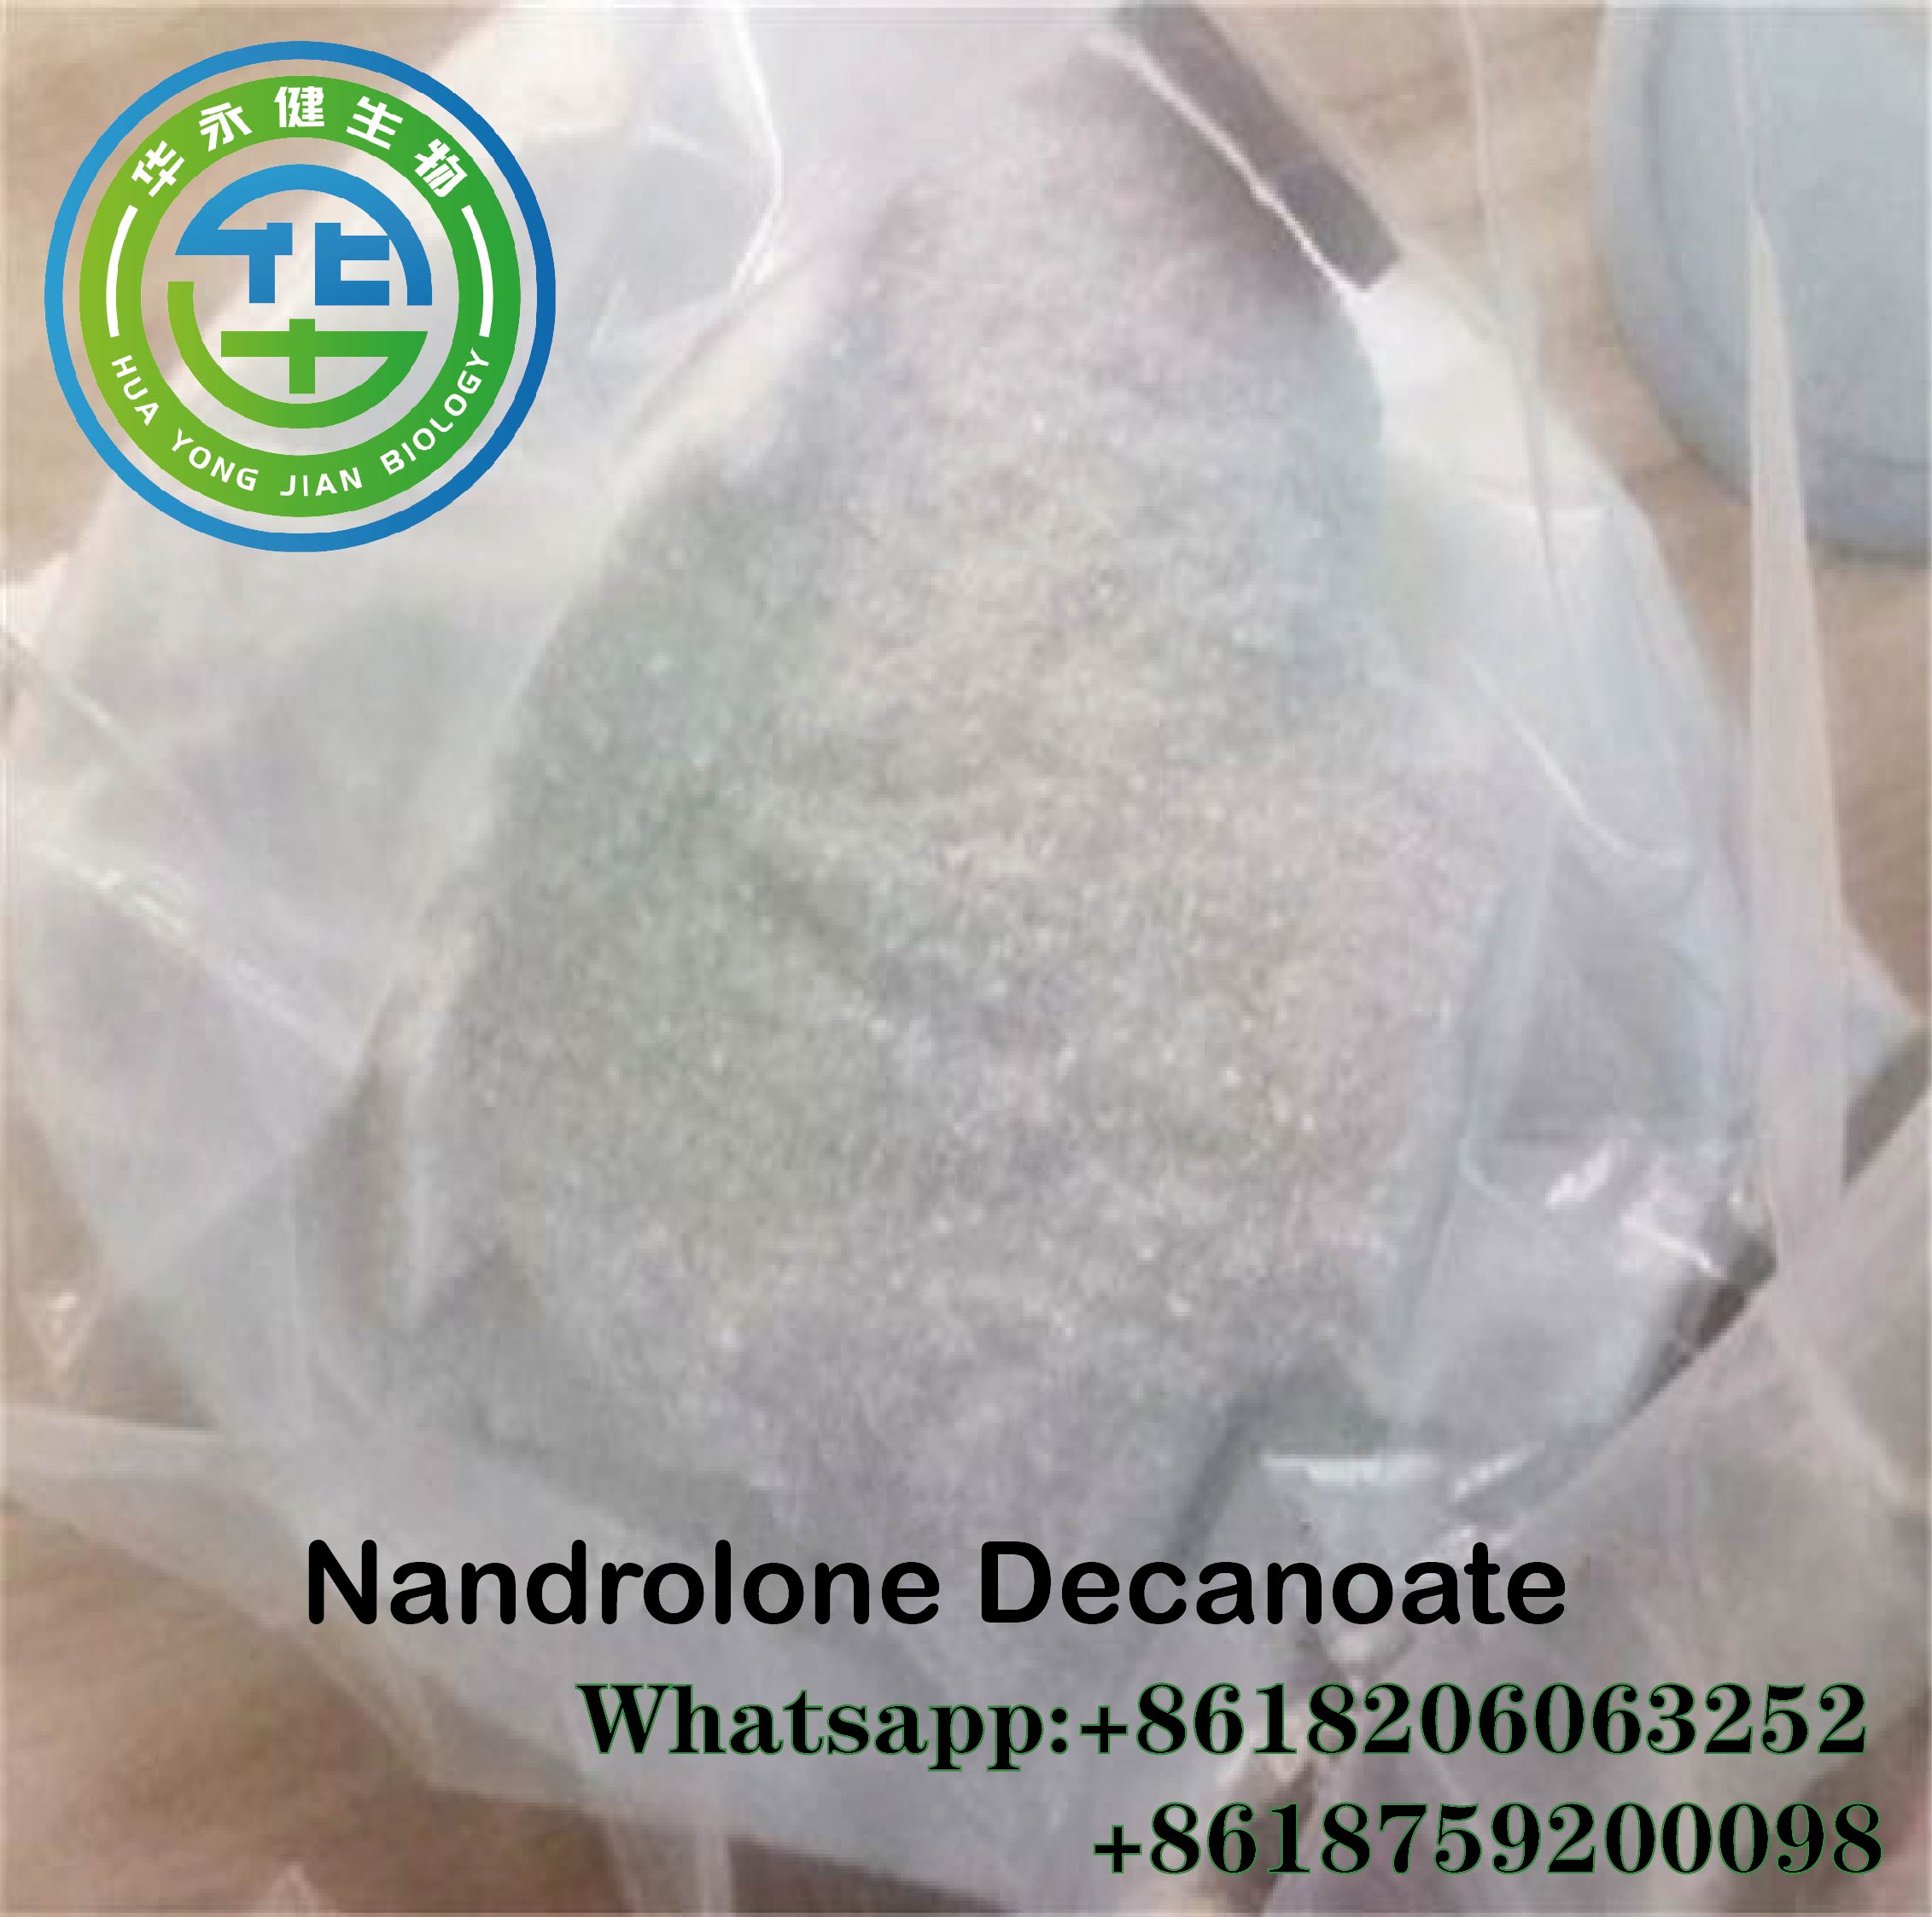 Nandrolone Decanoate Powder Anabolic Steroids Pharmaceutical Injectable Liquids Durabolin Deca CasNO.360-70-3/DECA Featured Image